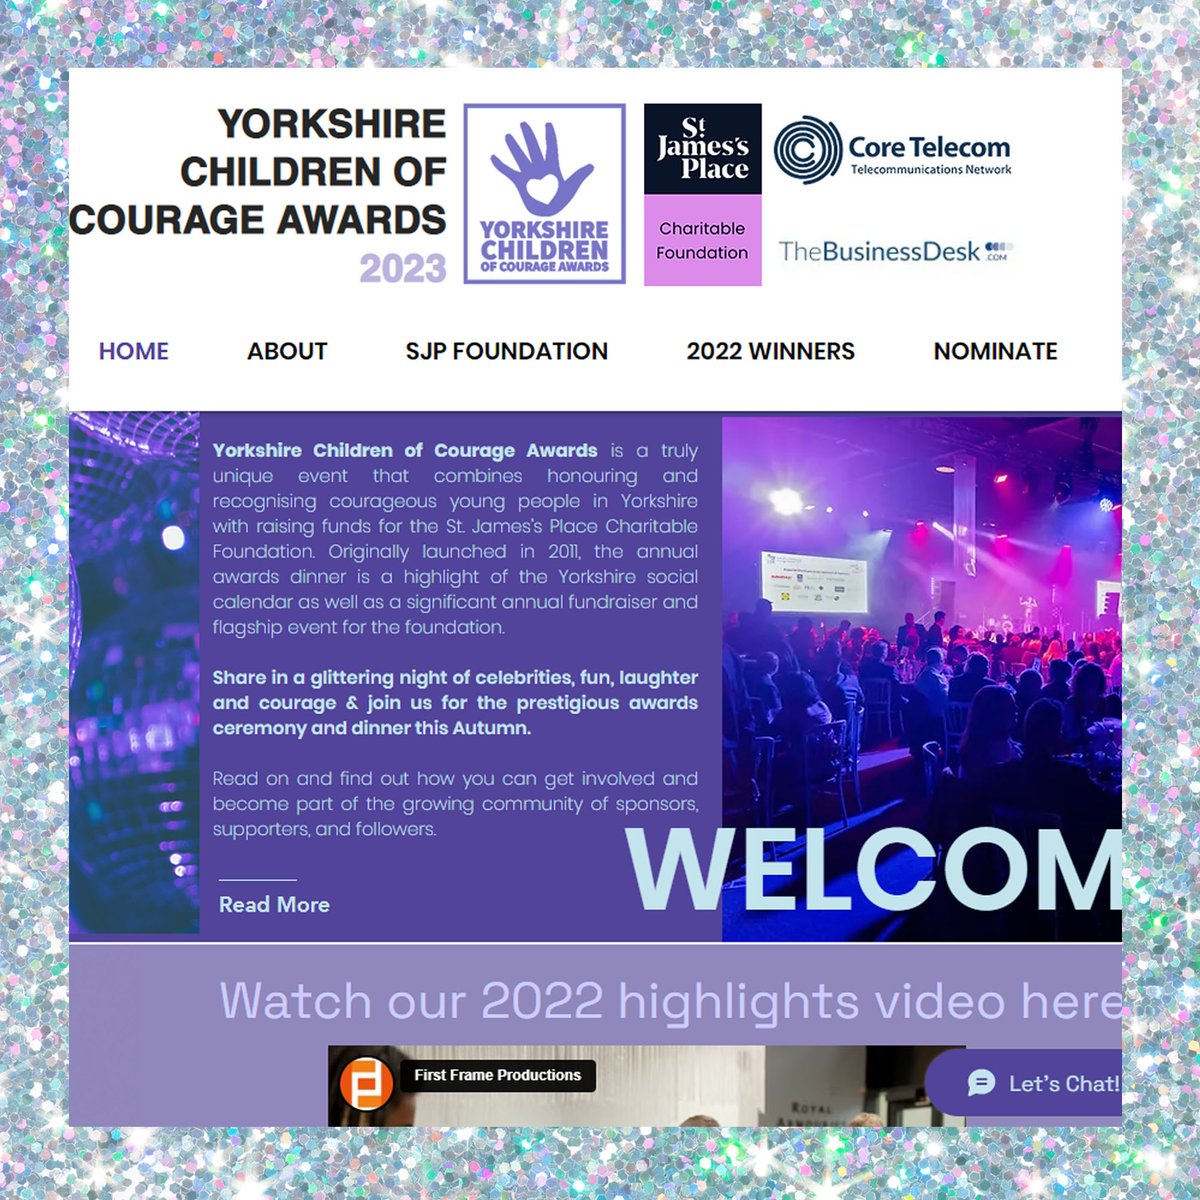 Our brand new website for the Yorkshire Children of Courage Awards 2023 is live. You can find out about the event itself, see our amazing 2022 winners, become a sponsor, book a table and take a look at the St. James's Place Charitable Foundation and the incredible work they do!